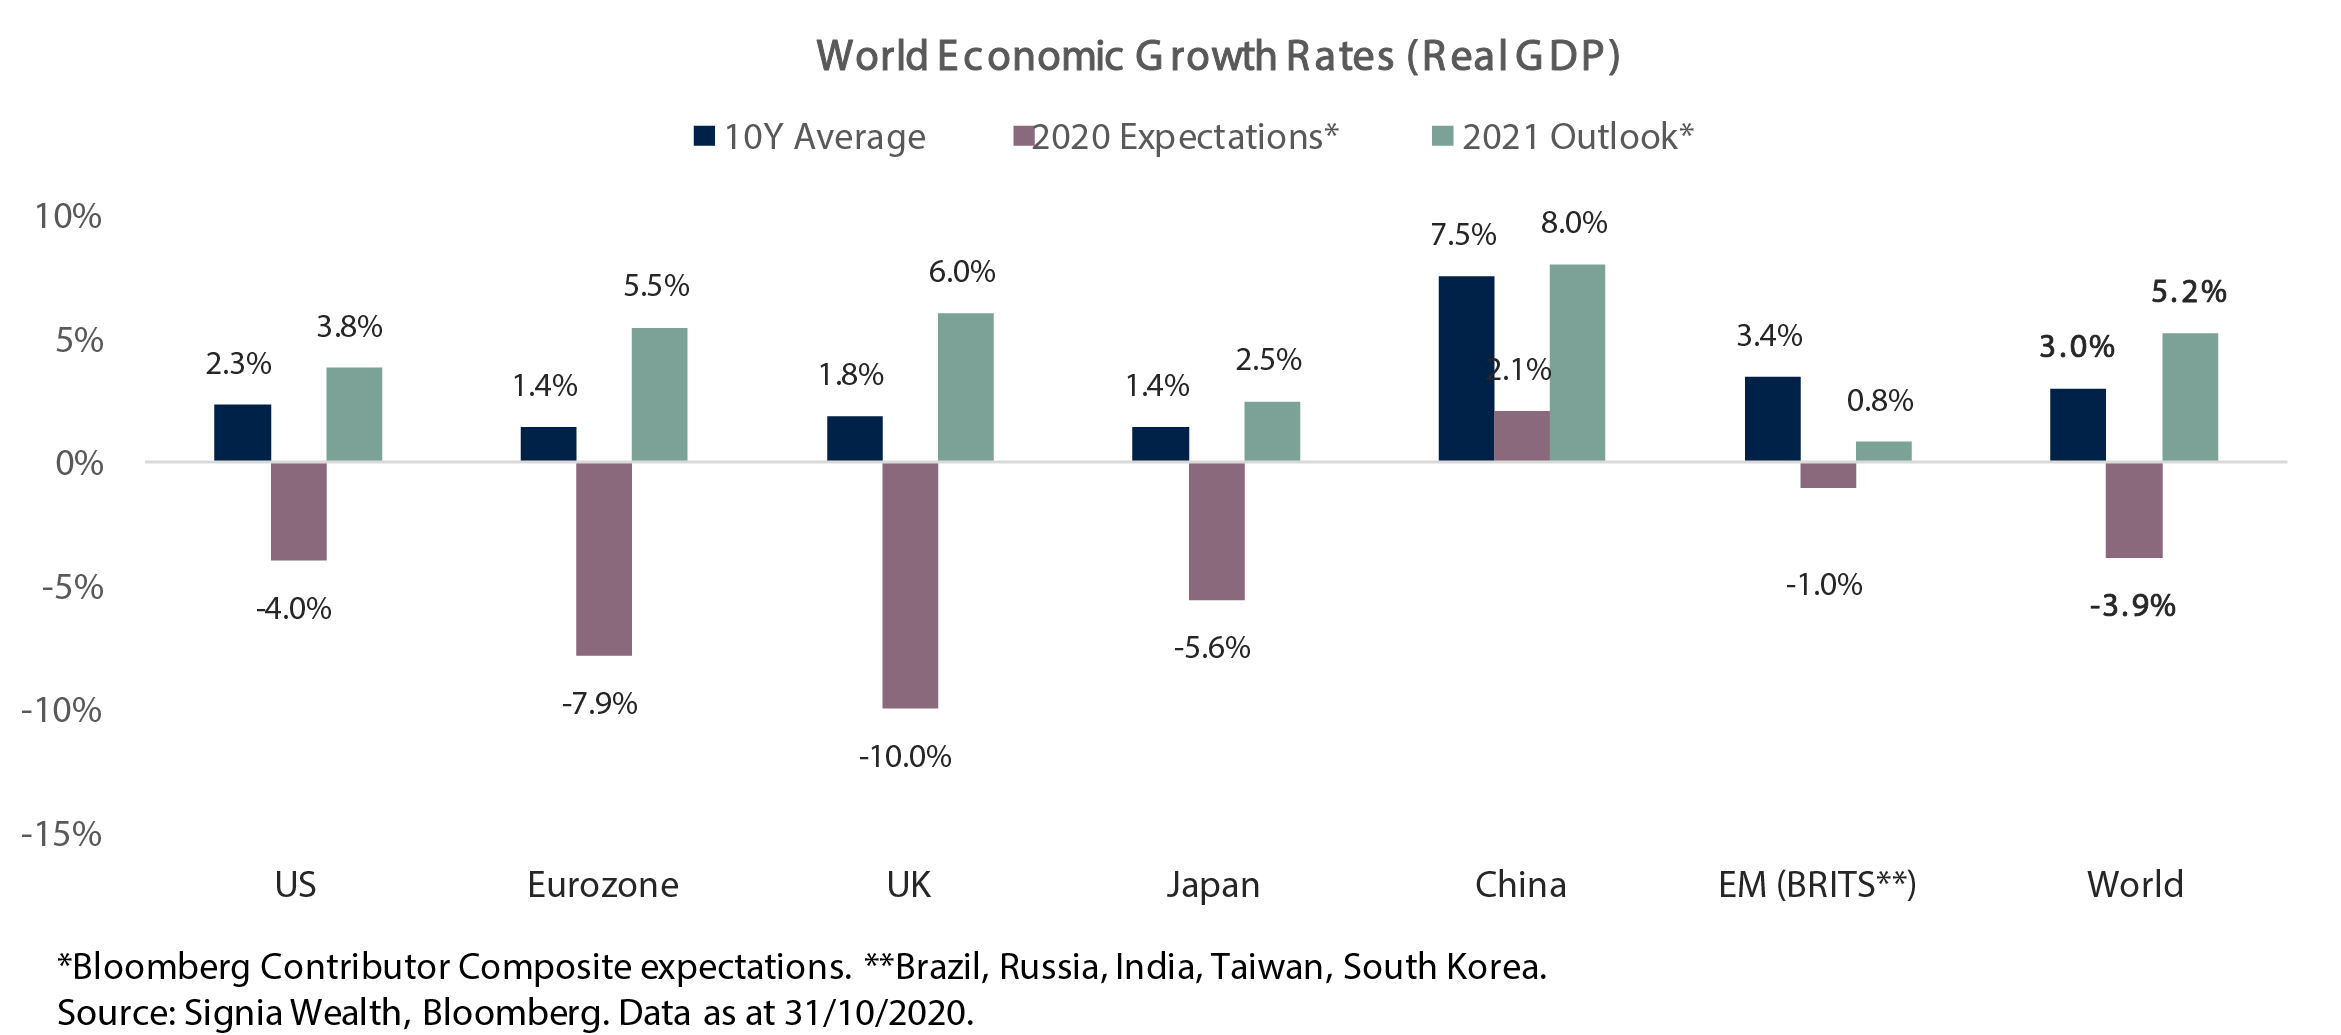 World Economic Growth Rates (Real GDP)